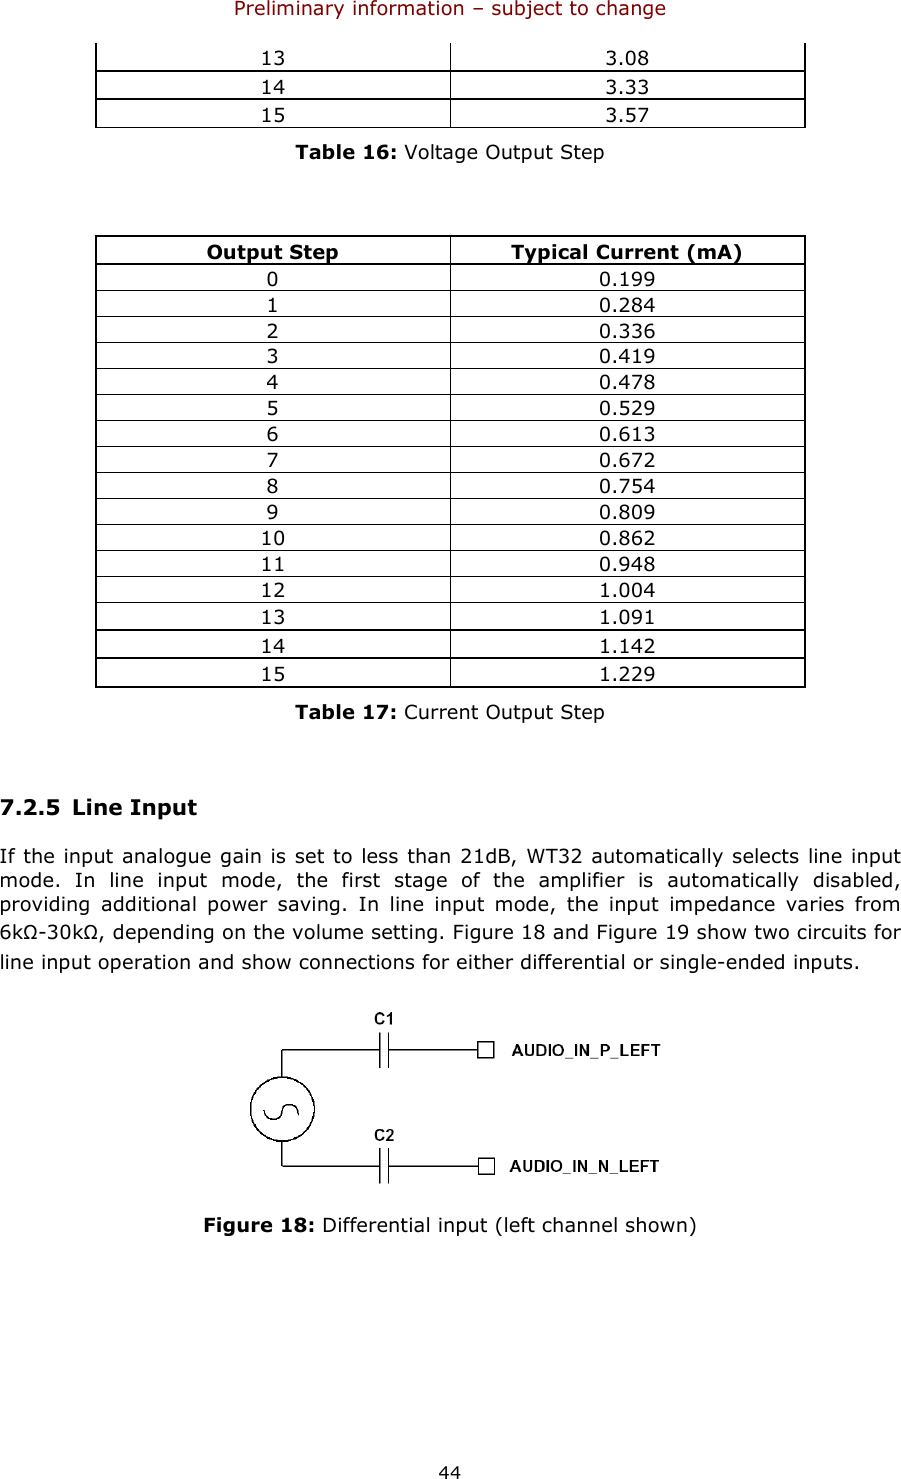 Preliminary information – subject to change  44 13  3.08 14  3.33 15  3.57 Table 16: Voltage Output Step  Output Step  Typical Current (mA) 0  0.199 1  0.284 2  0.336 3  0.419 4  0.478 5  0.529 6  0.613 7  0.672 8  0.754 9  0.809 10  0.862 11  0.948 12  1.004 13  1.091 14  1.142 15  1.229 Table 17: Current Output Step  7.2.5 Line Input If the input analogue gain is set to less than 21dB, WT32 automatically selects line input mode.  In  line  input  mode,  the  first  stage  of  the  amplifier  is  automatically  disabled, providing  additional  power  saving.  In  line  input  mode,  the  input  impedance  varies  from 6kΩ-30kΩ, depending on the volume setting. Figure 18 and Figure 19 show two circuits for line input operation and show connections for either differential or single-ended inputs.  Figure 18: Differential input (left channel shown) 